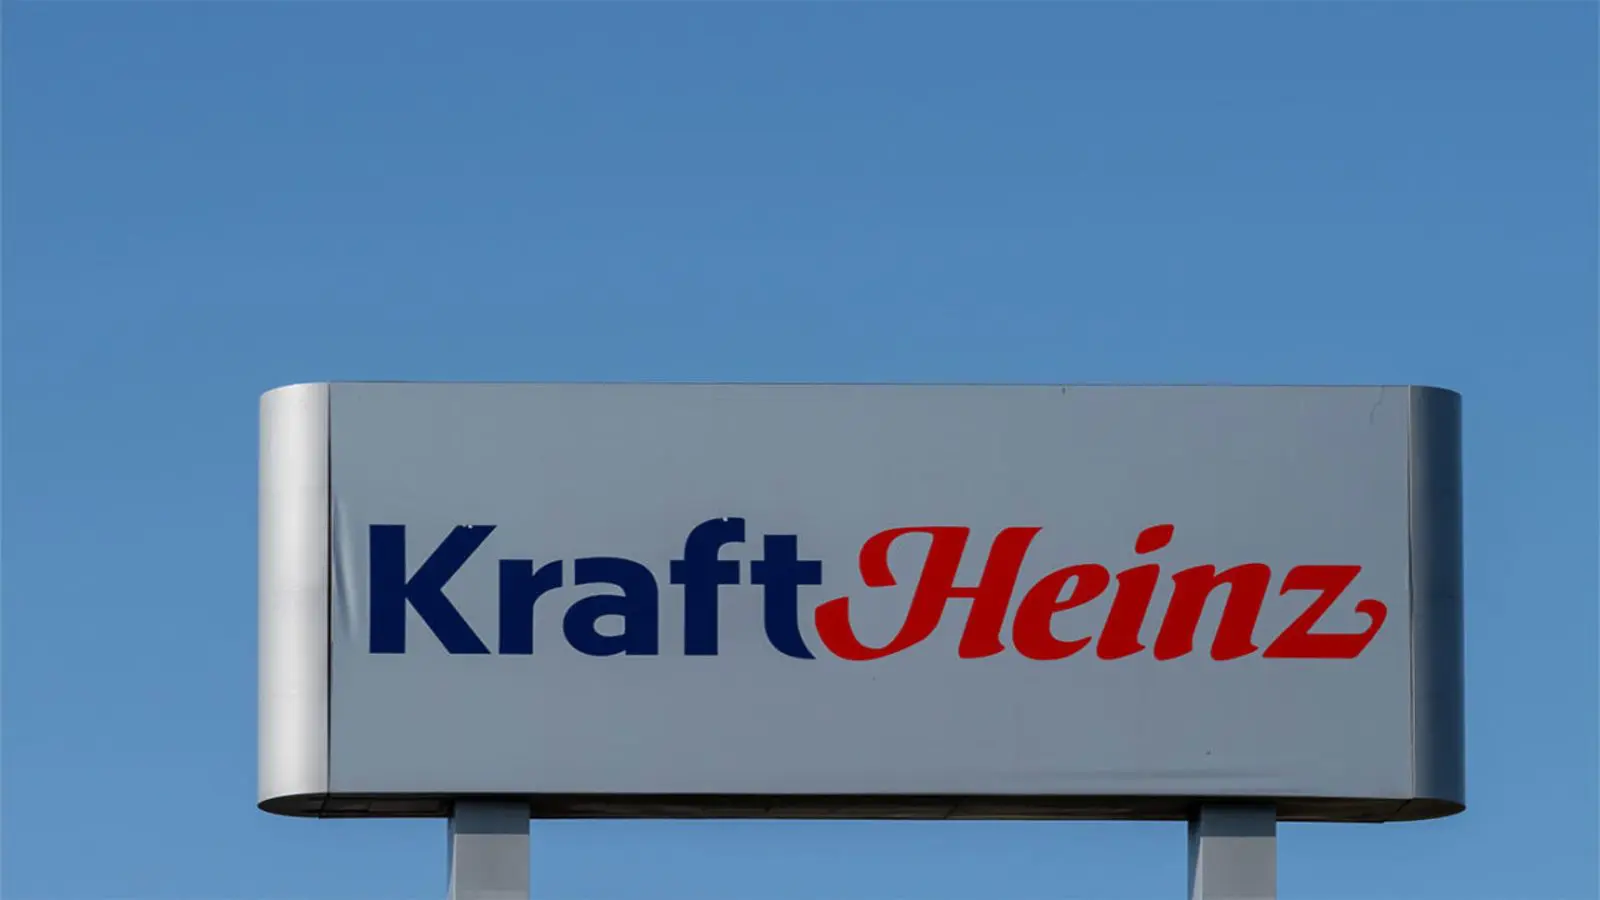 Kraft Heinz delivers strong results of 2.9% rise in Q3 net sales amid volatile environment